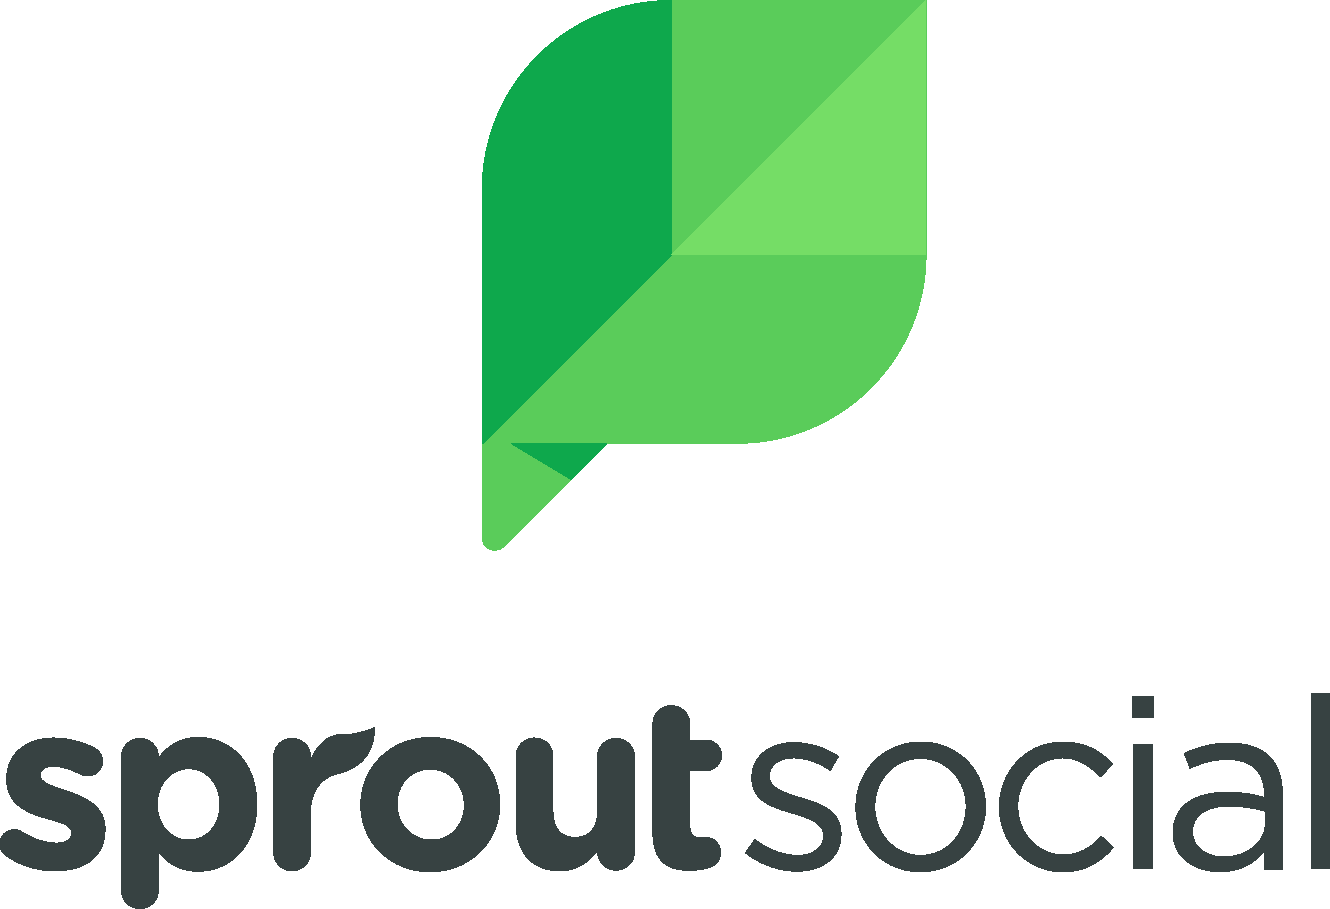 Sprout Social is a social media management and intelligence tool for brands and agencies of all sizes to manage conversations and surface the actionable insights that drive real business impact.